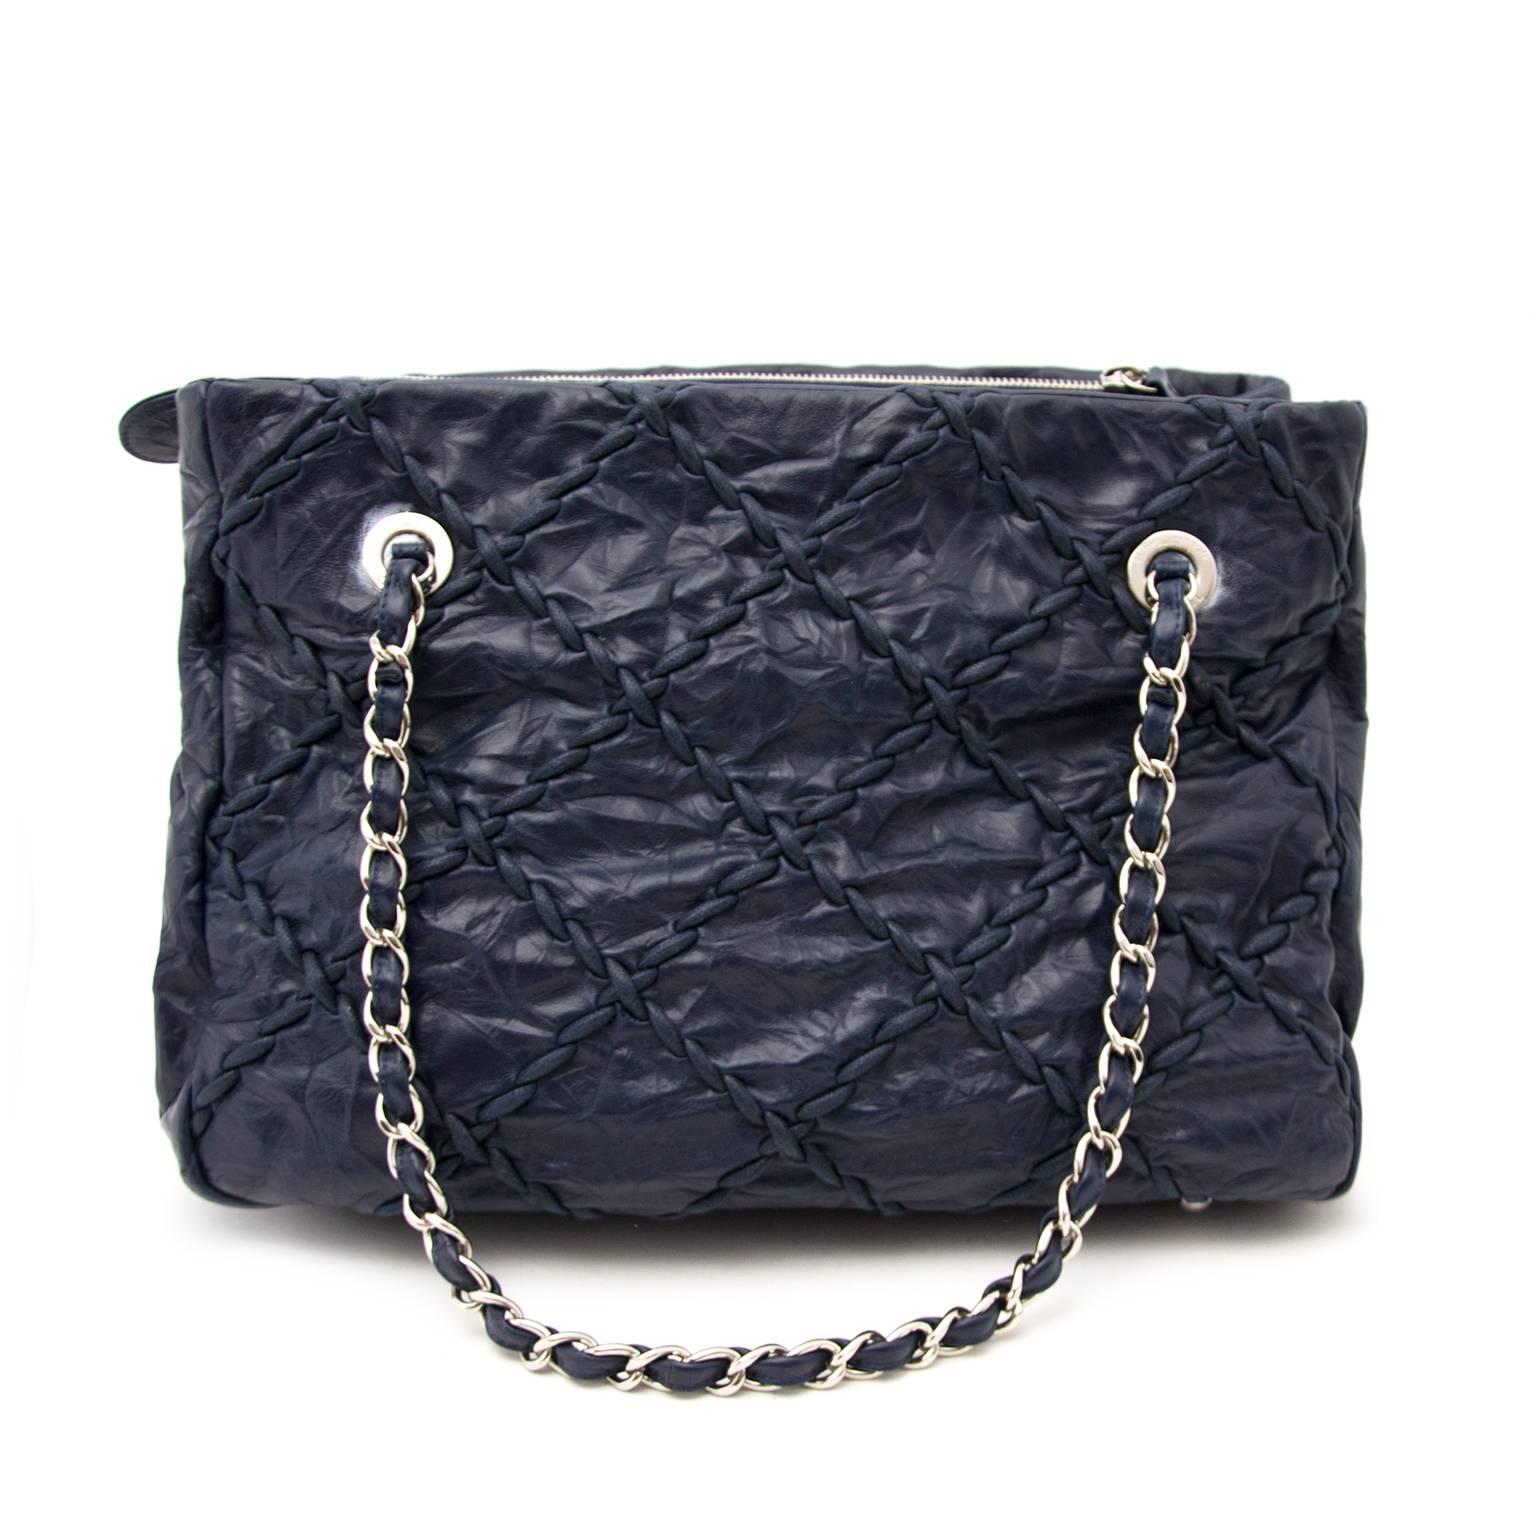 Chanel Blue Grand Shopping Tote Bag
This blue stitched leather Chanel grand shopping tote is the perfect everyday bag. 
The spacious grey lined interior has one zipper and two slip pockets. 
Easily store your essentials in this grand shopping